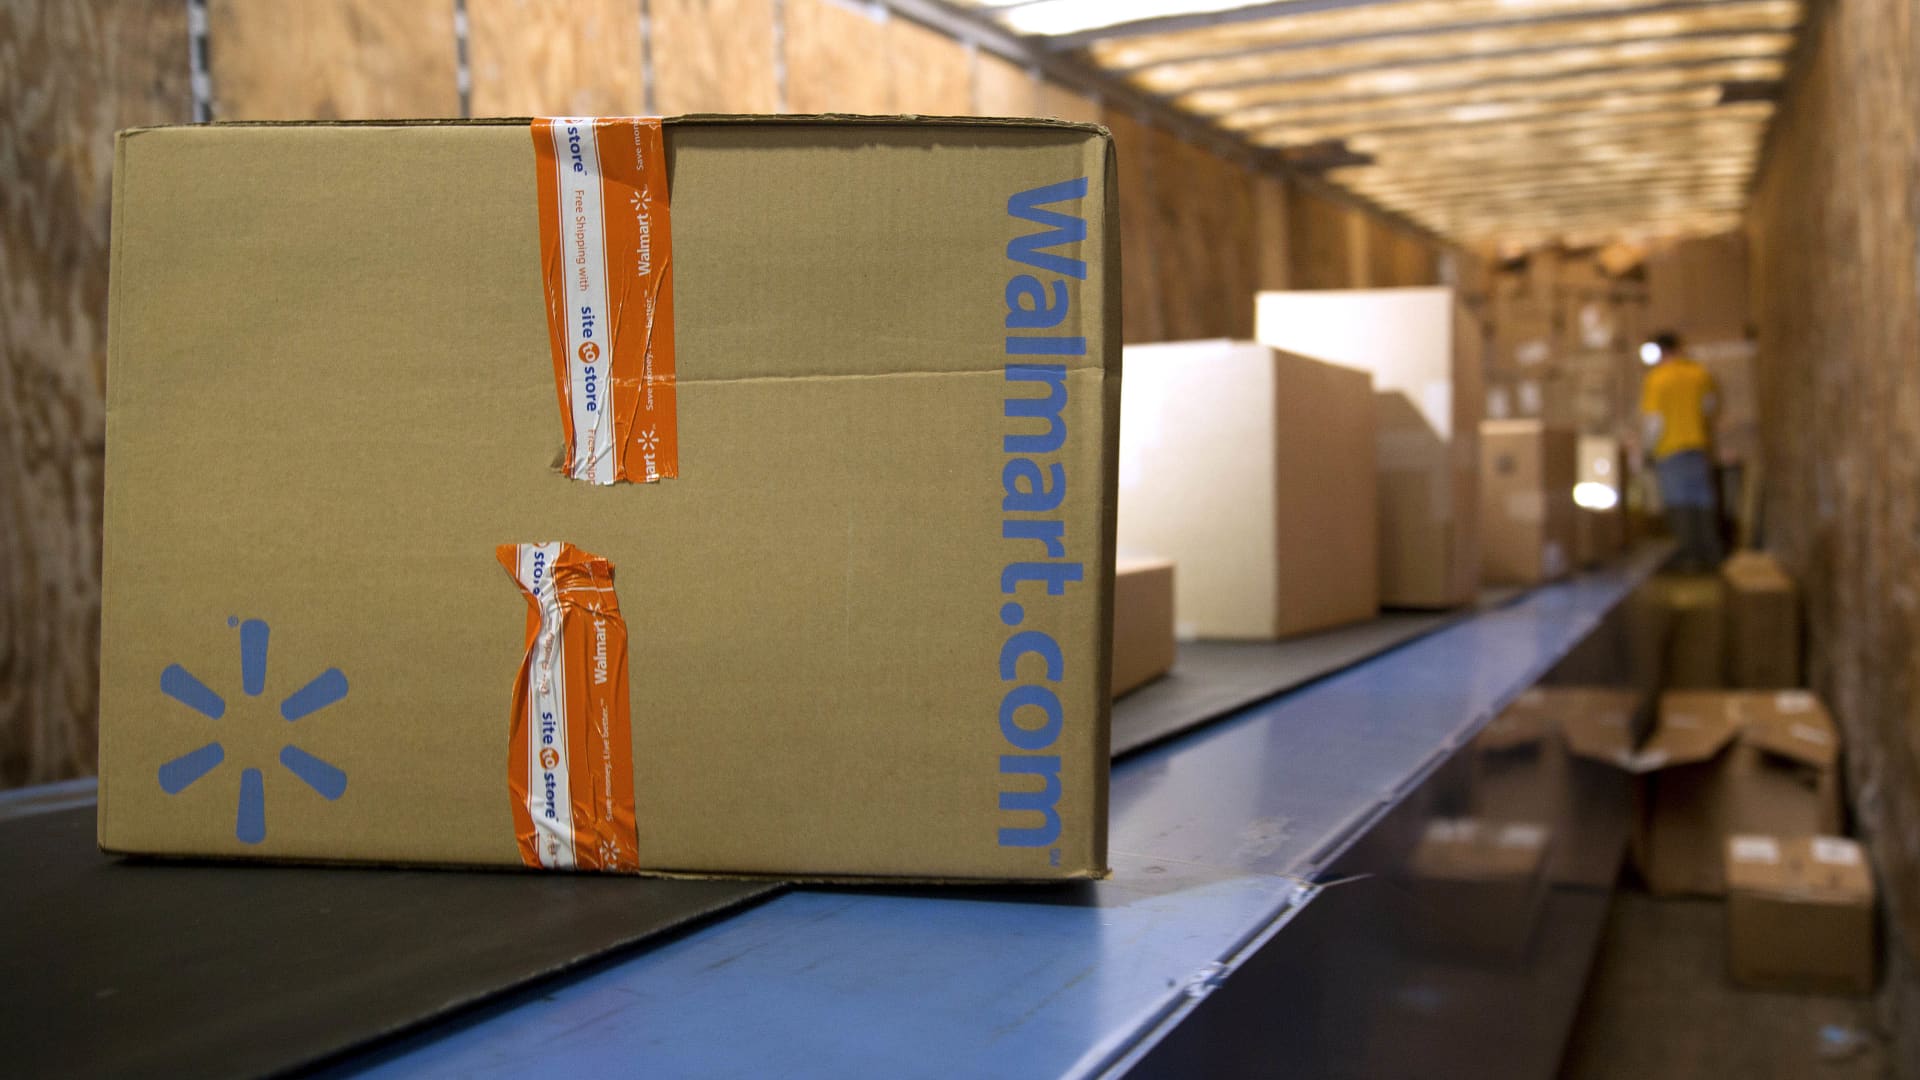 Walmart ditches online shipping minimum for Walmart+ to better compete with Amazon Prime